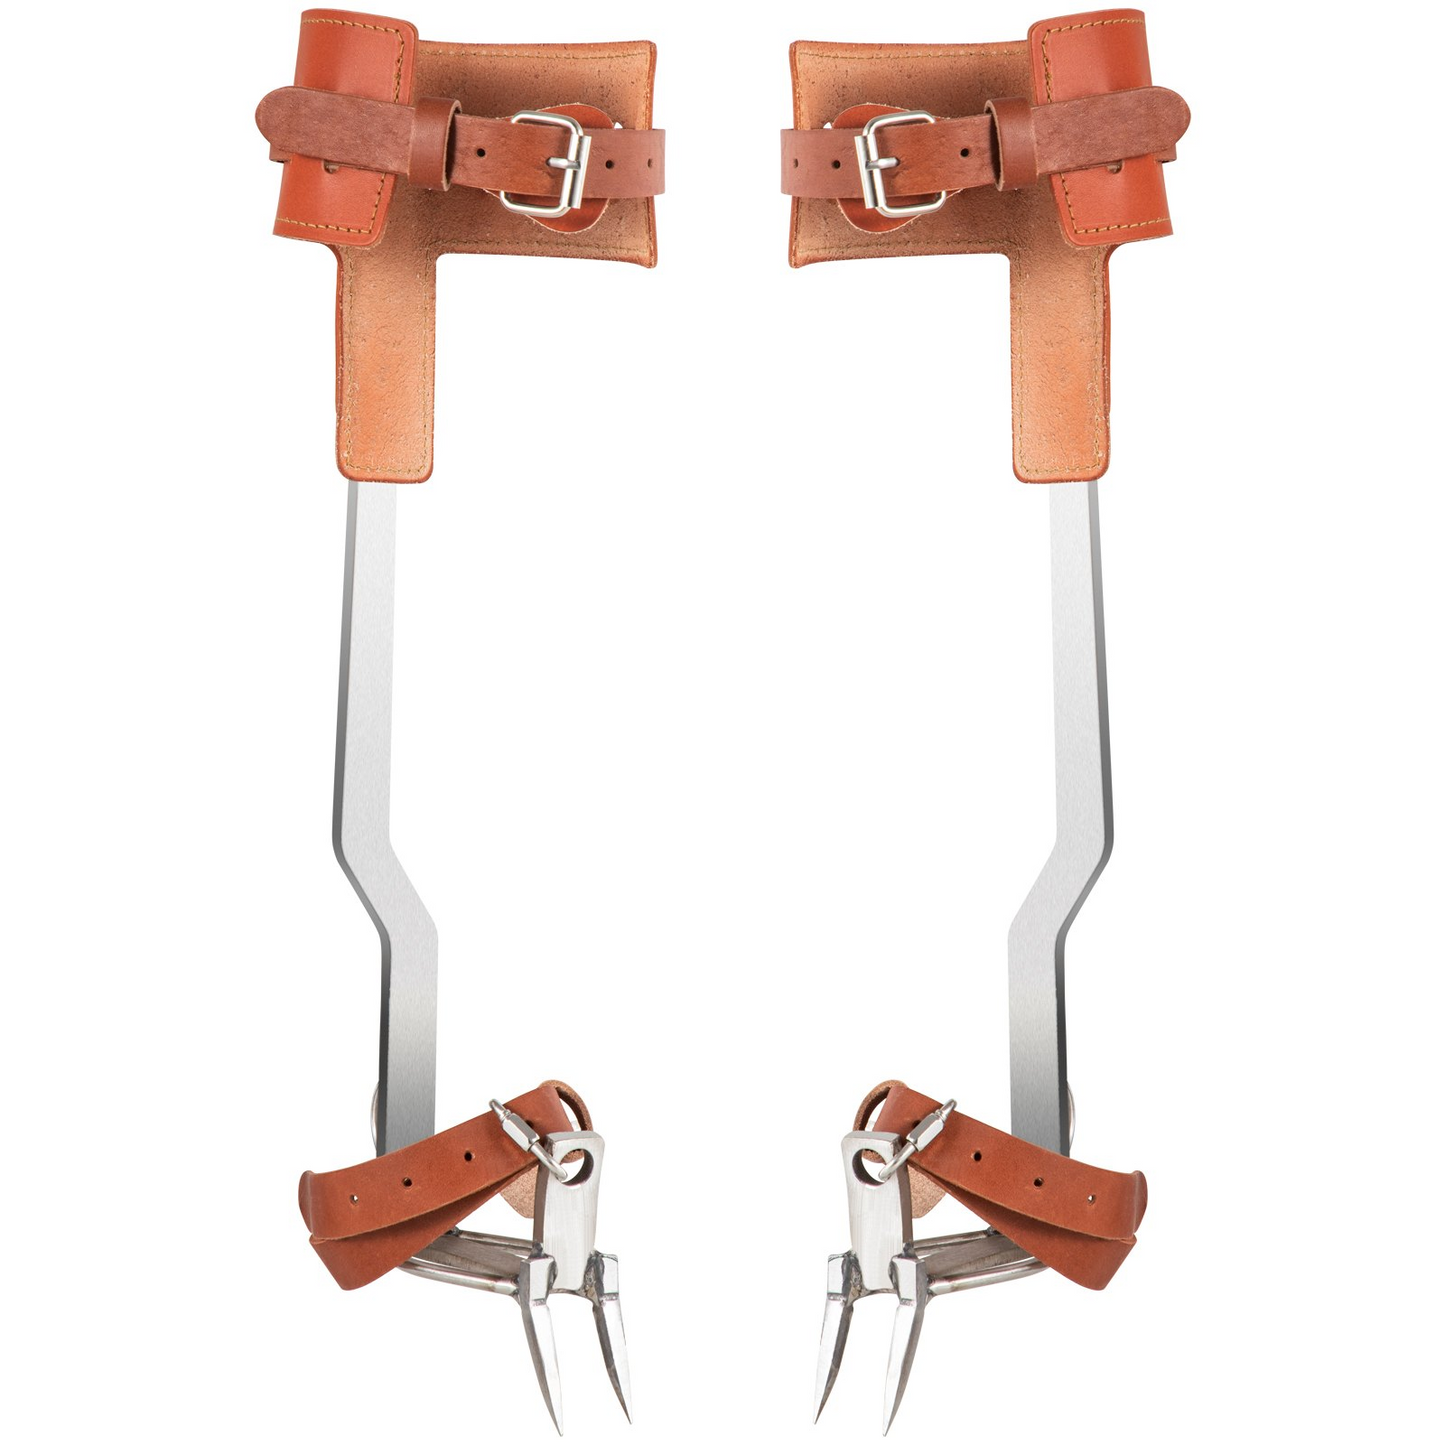 VEVOR Tree Climbing Spikes | Stainless Steel Pole Climbing Spurs with Adjustable Straps and Cow Leather Padding